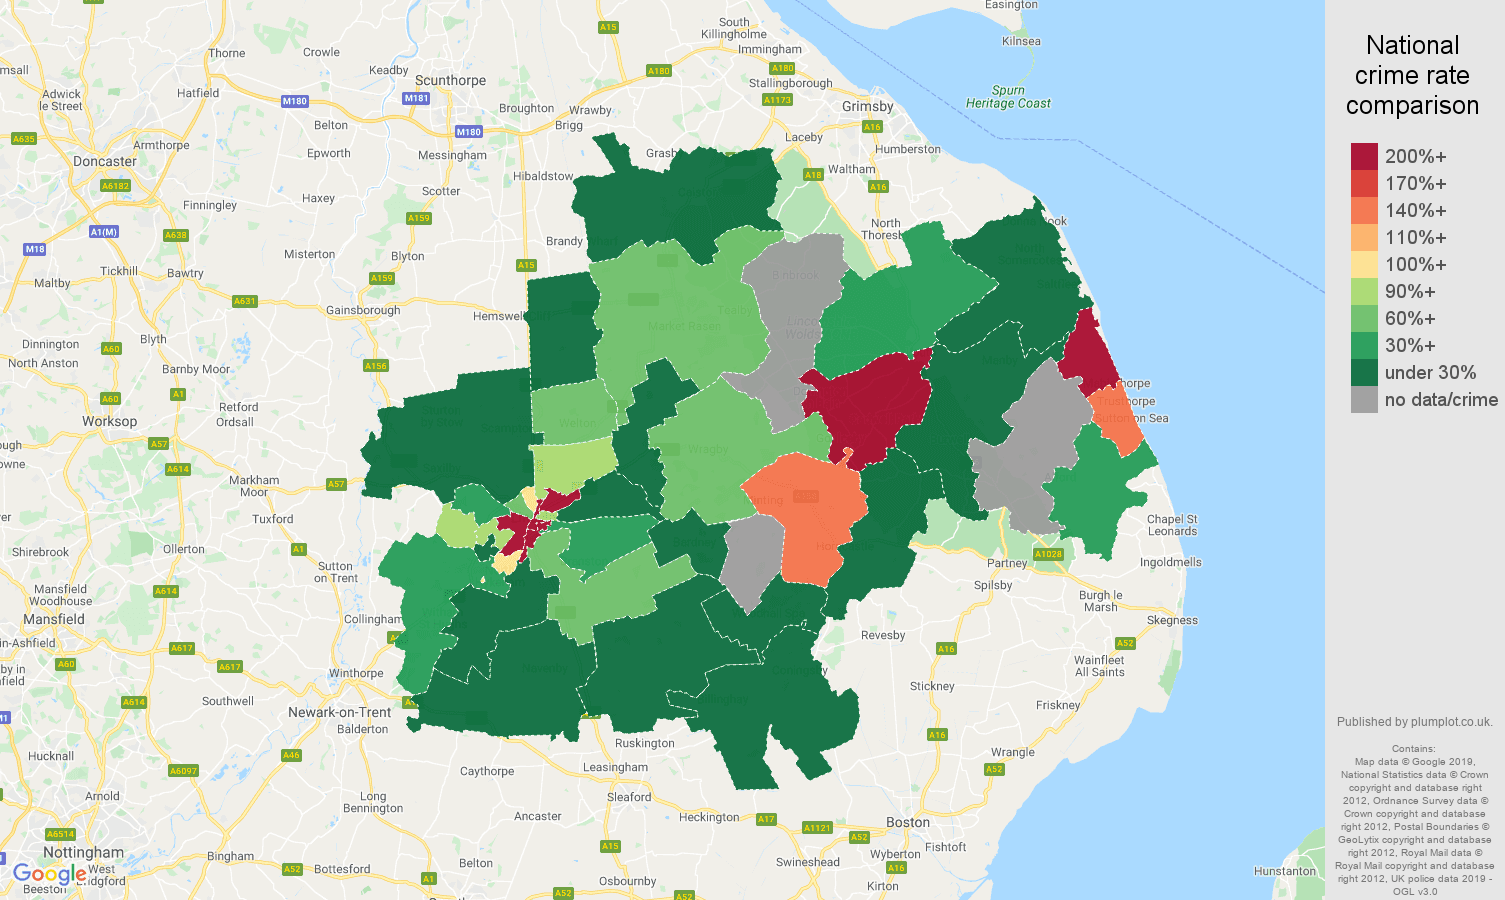 Lincoln shoplifting crime rate comparison map